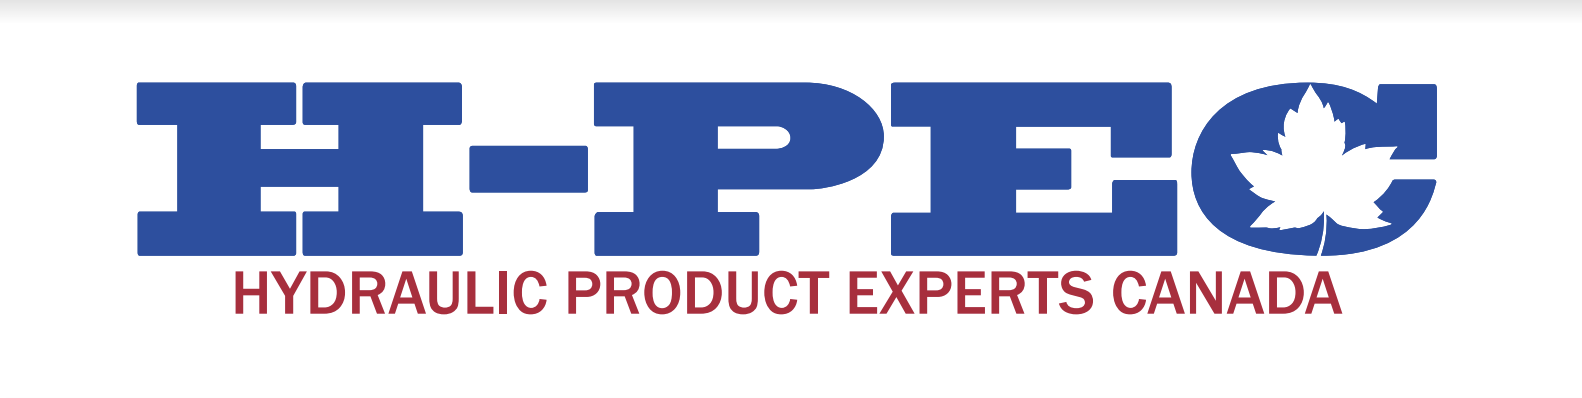 Hydraulic Product Experts Canada